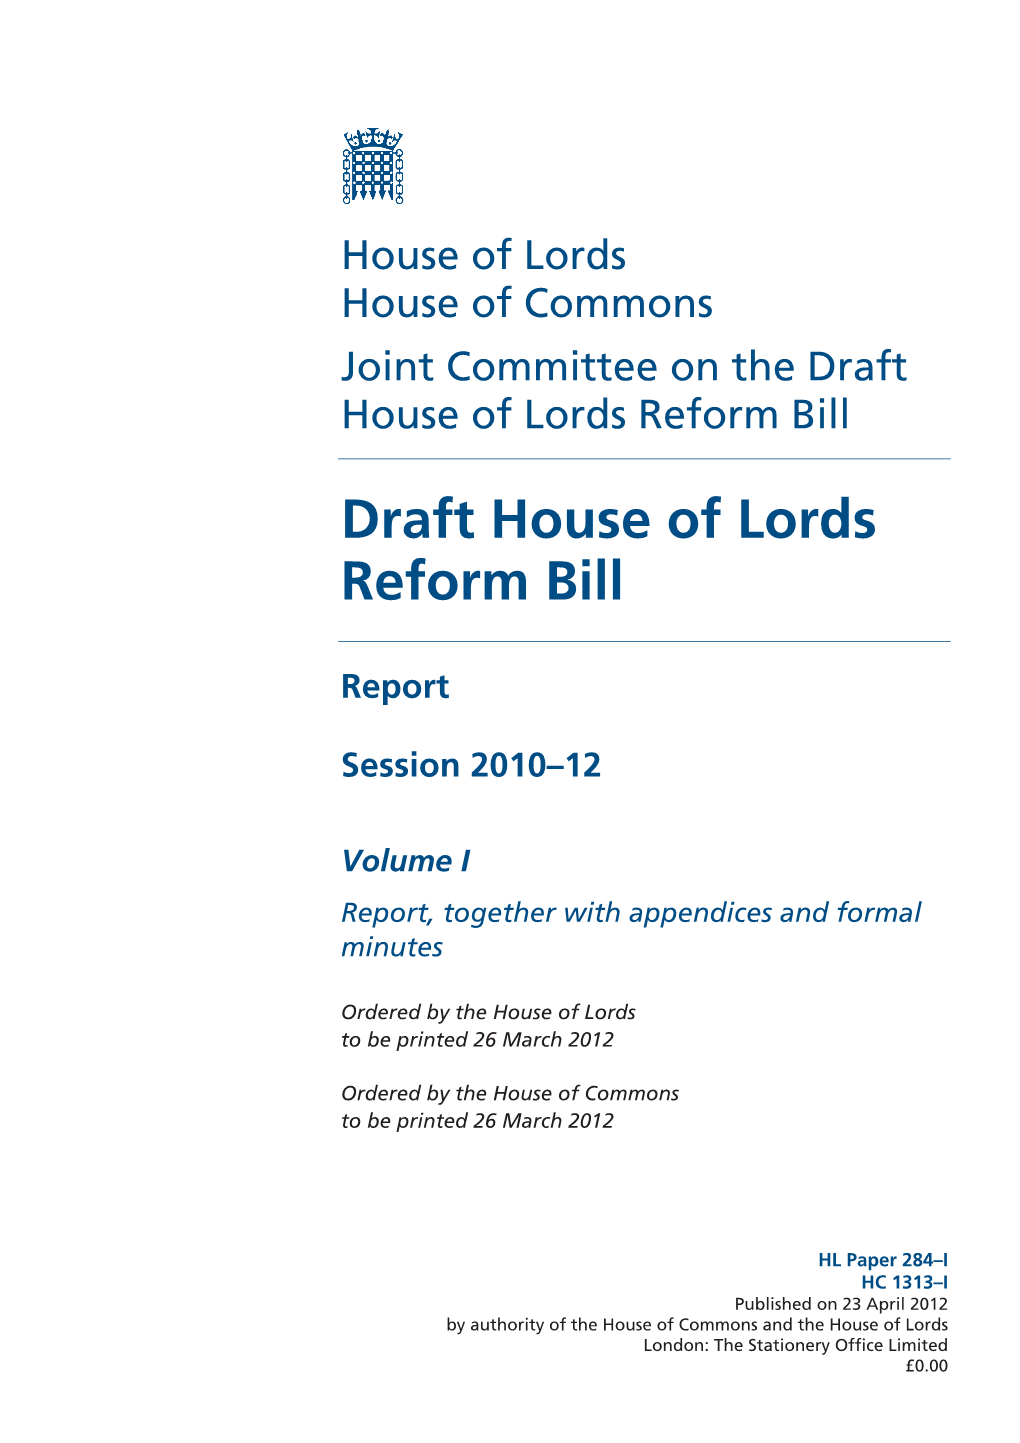 Joint Committee on the Draft House of Lords Reform Bill